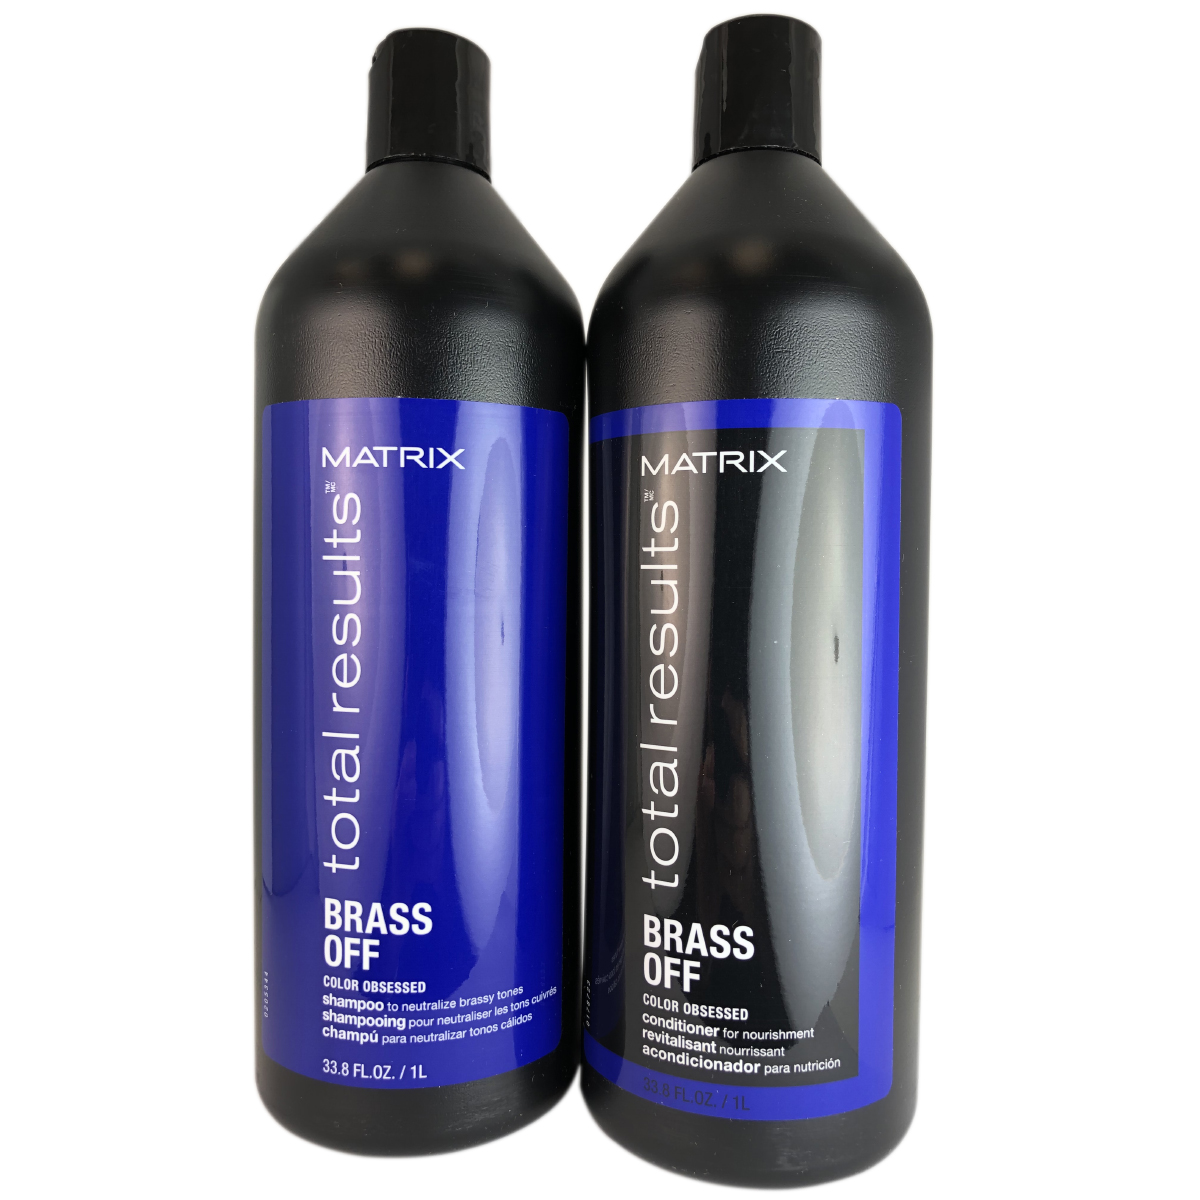 Matrix Total Results Brass Off Shampoo and Conditioner, 33.8 oz Ea - image 1 of 2